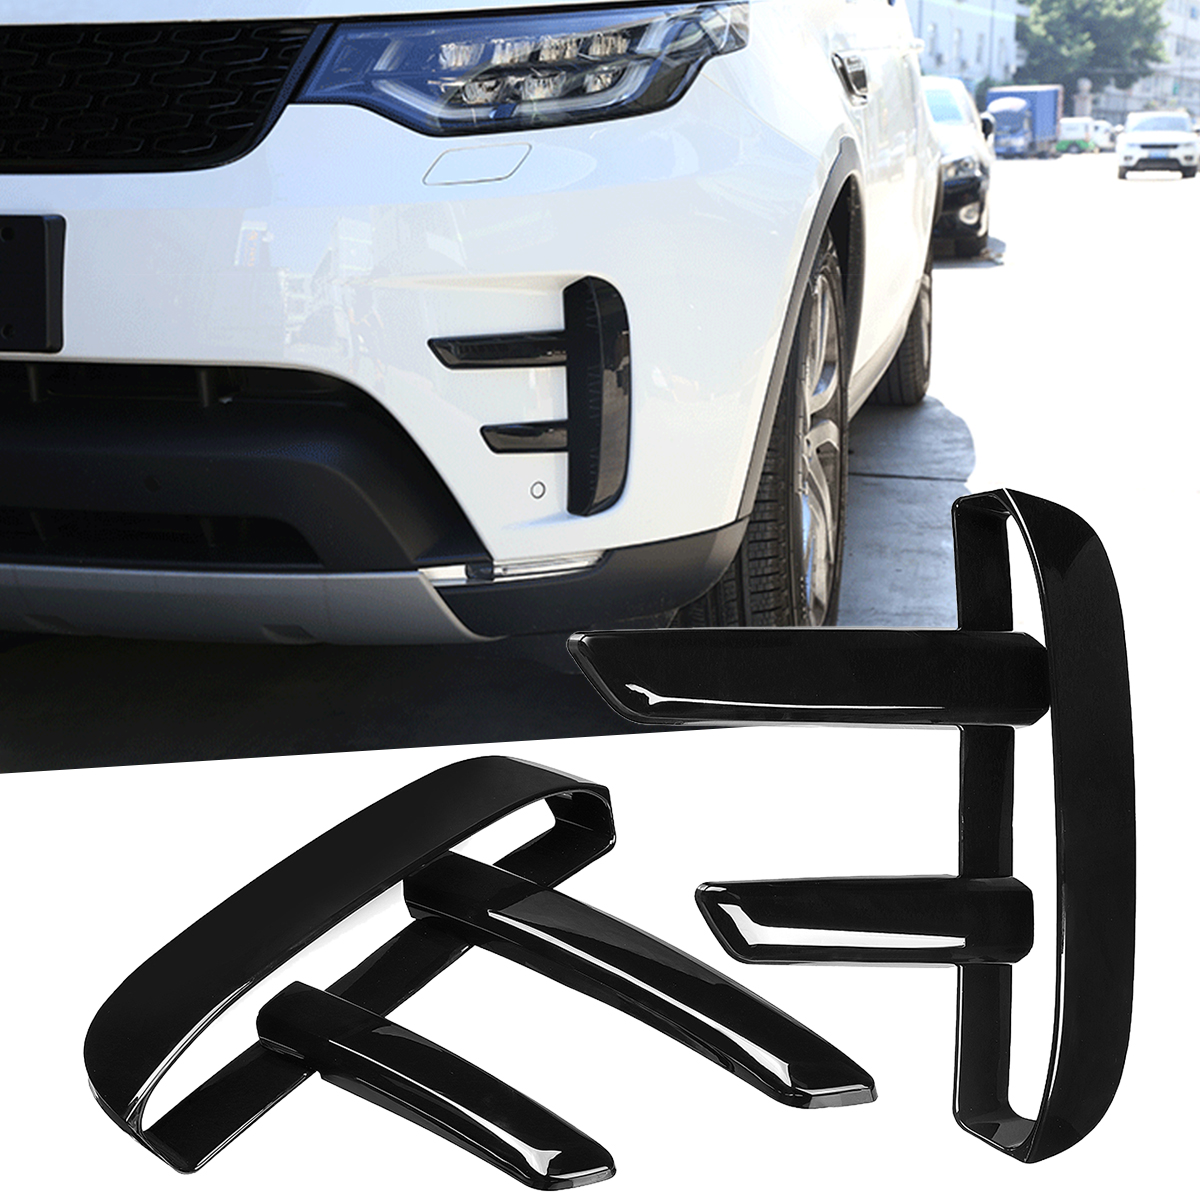 

Front Bumper Grille Grill Air Vent Cover Glossy Black ABS For Land Rover L462 Discovery 5 2017-2018